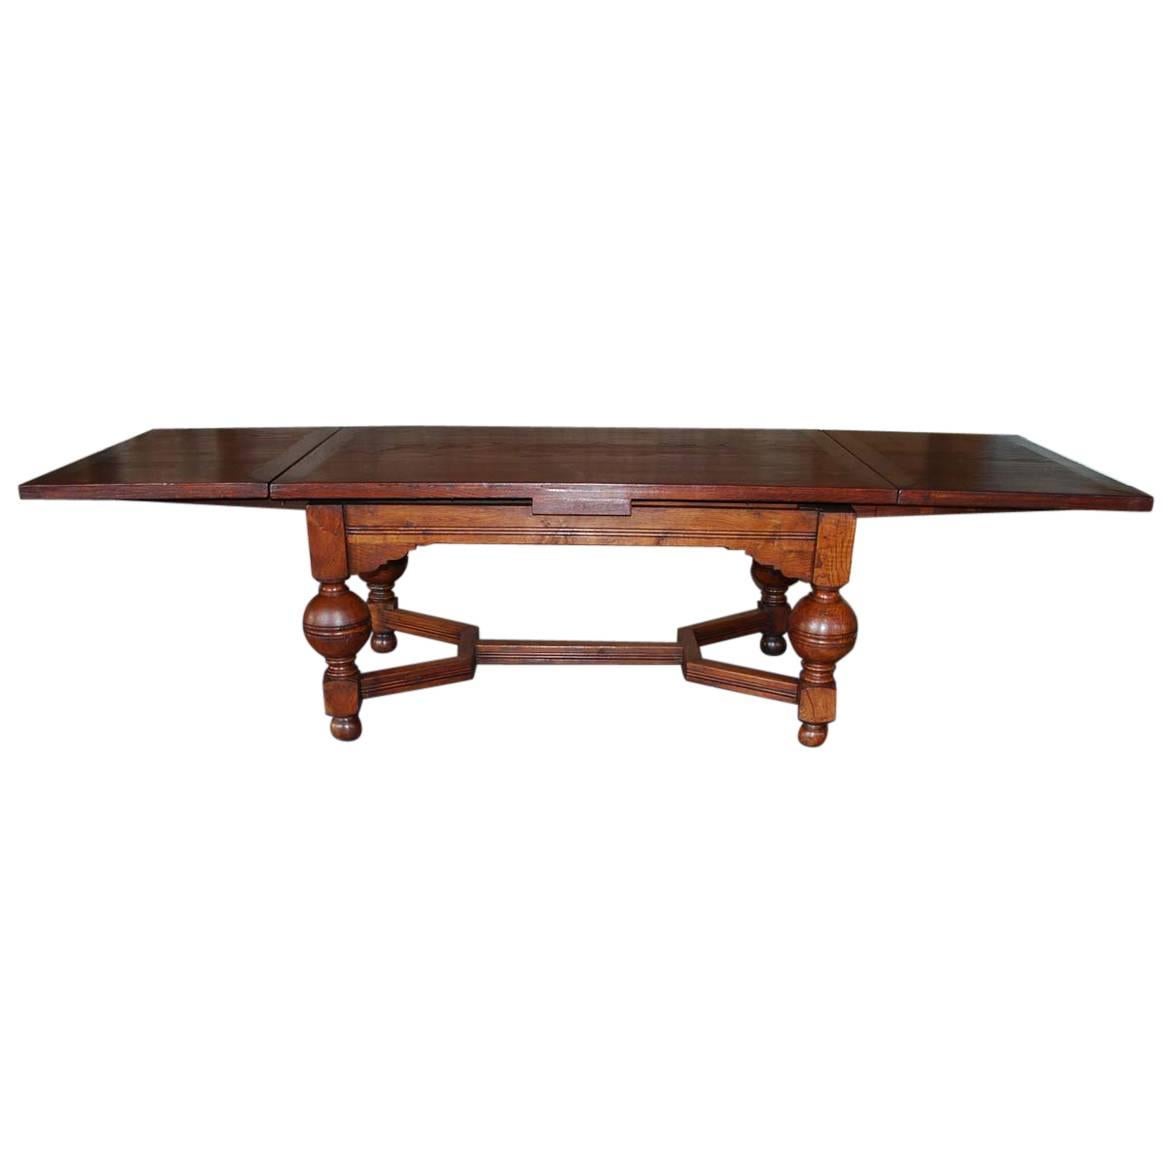 Dutch Renaissance Style Oakwood Draw Leaf Extension Dining Table